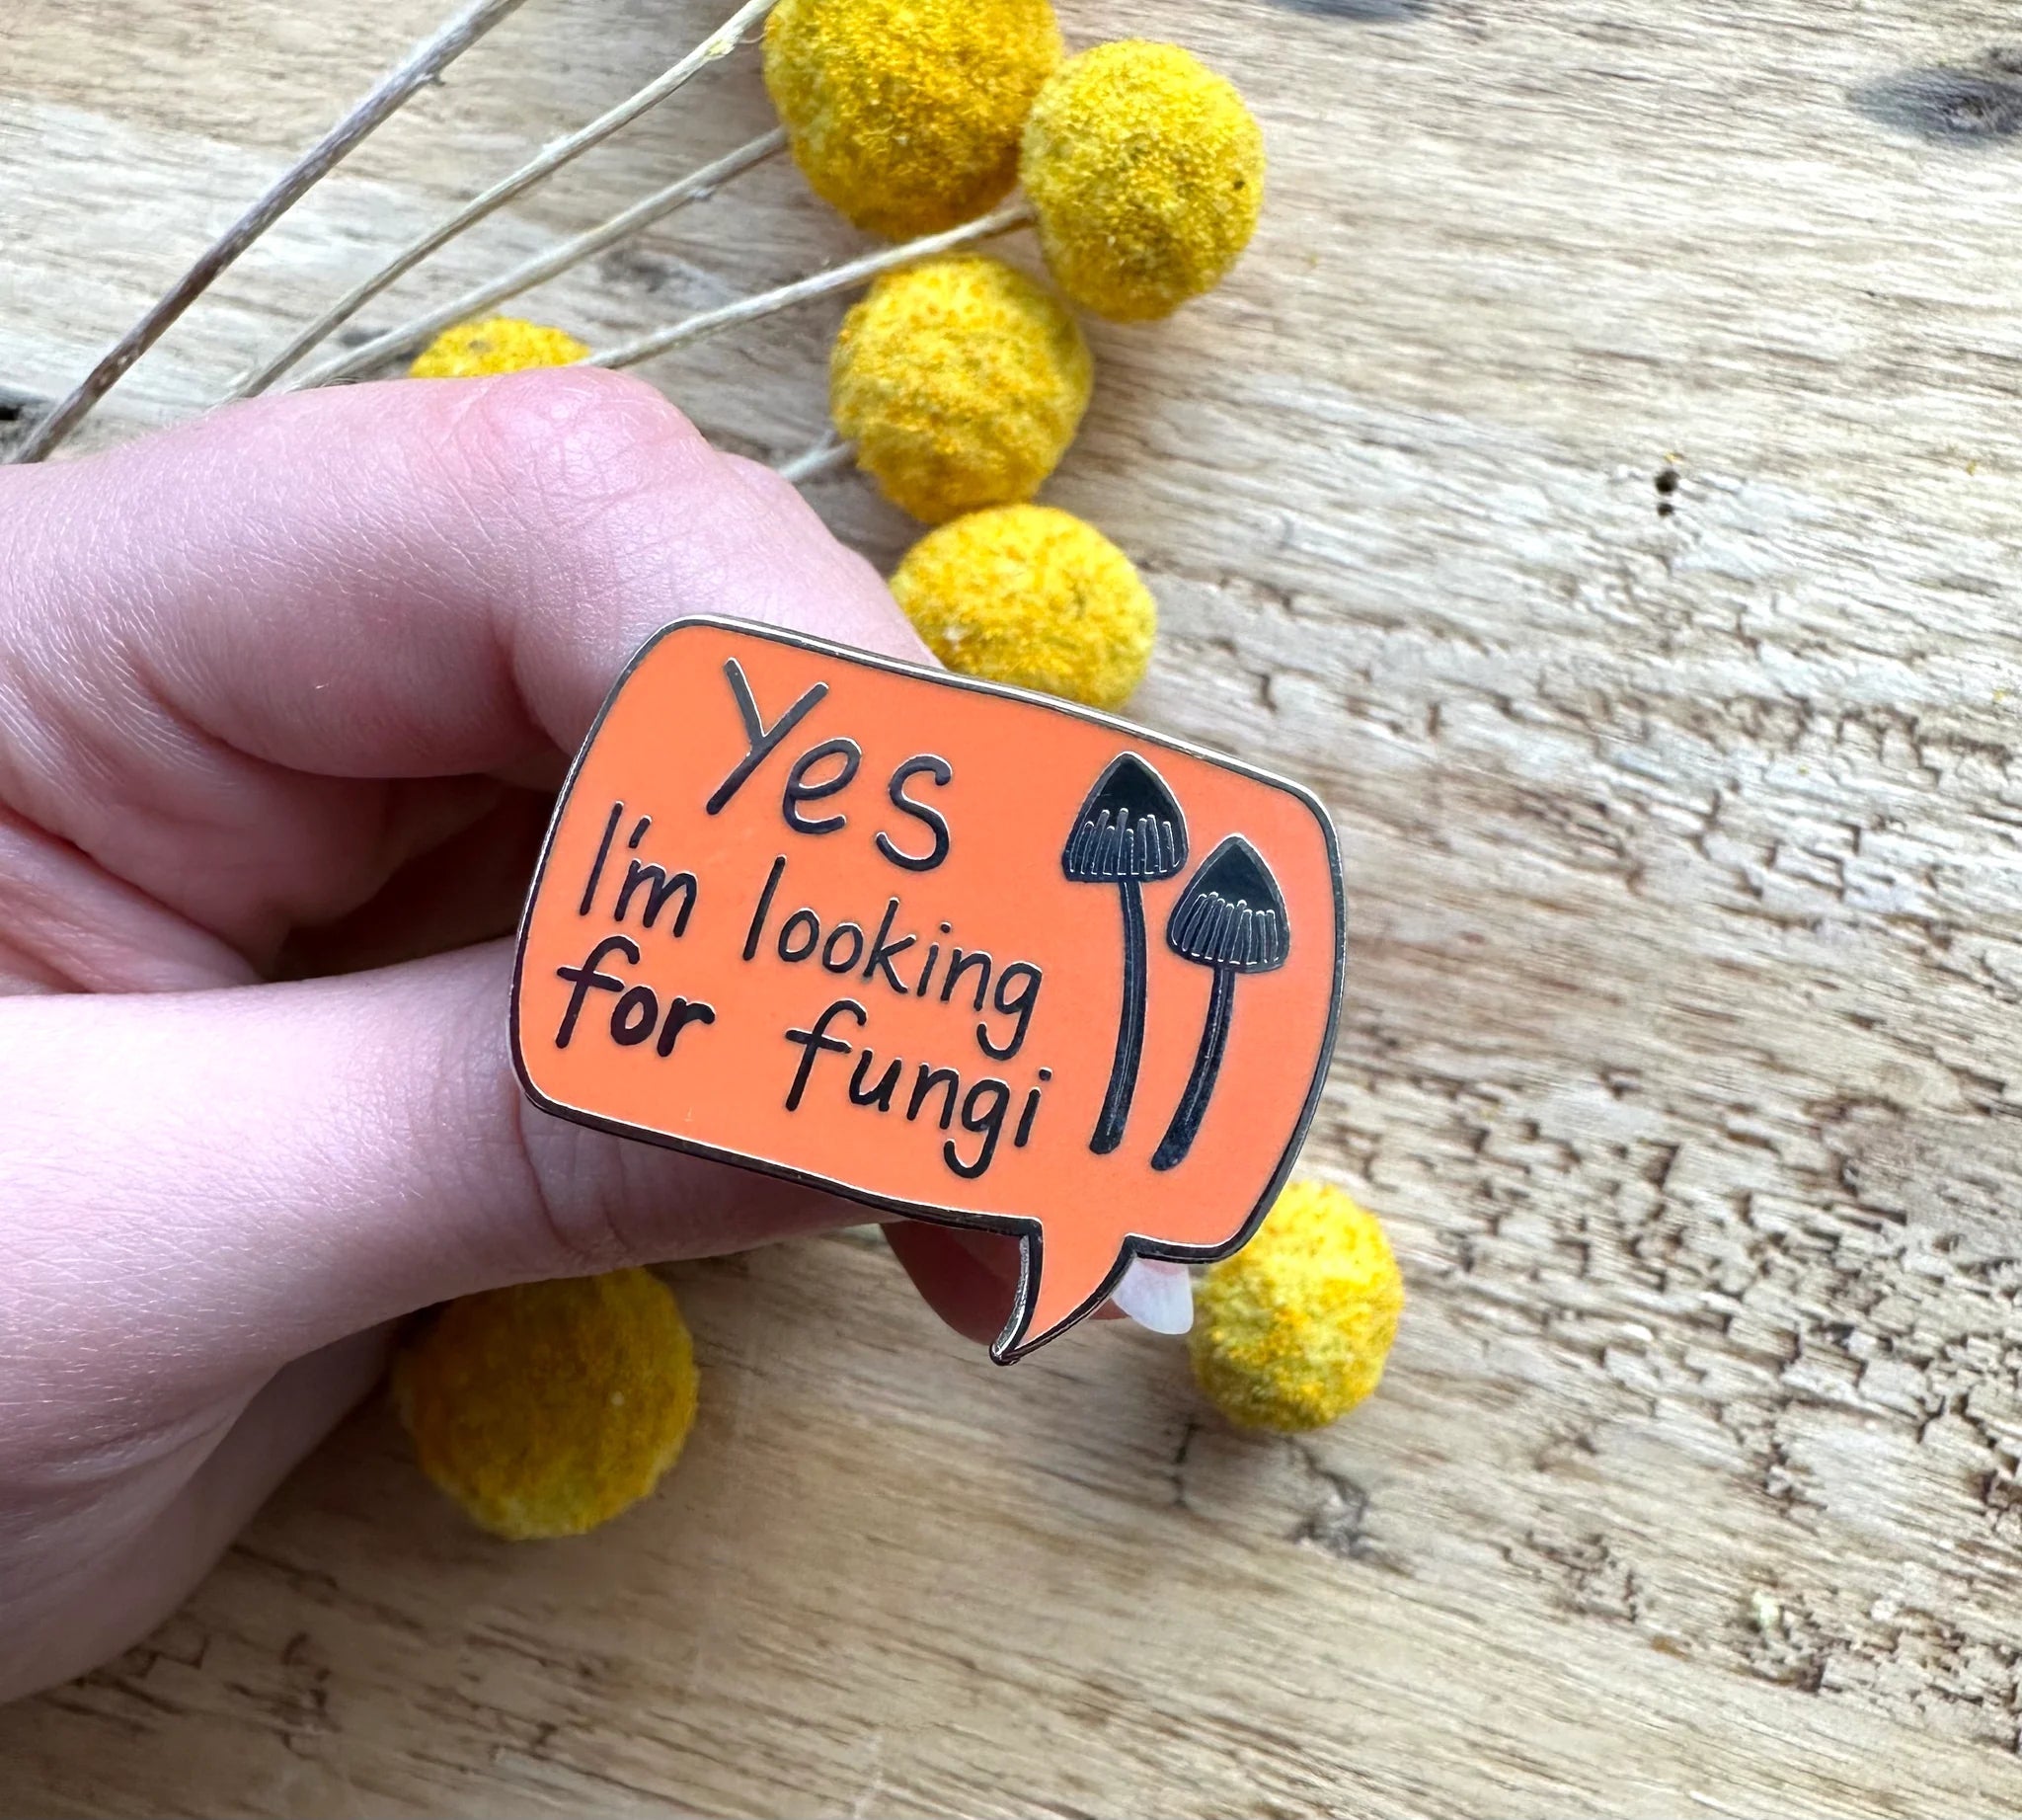 Tasmanian Enamel Pins by Pigment brooch Pigment "Yes I'm looking for fungi" 